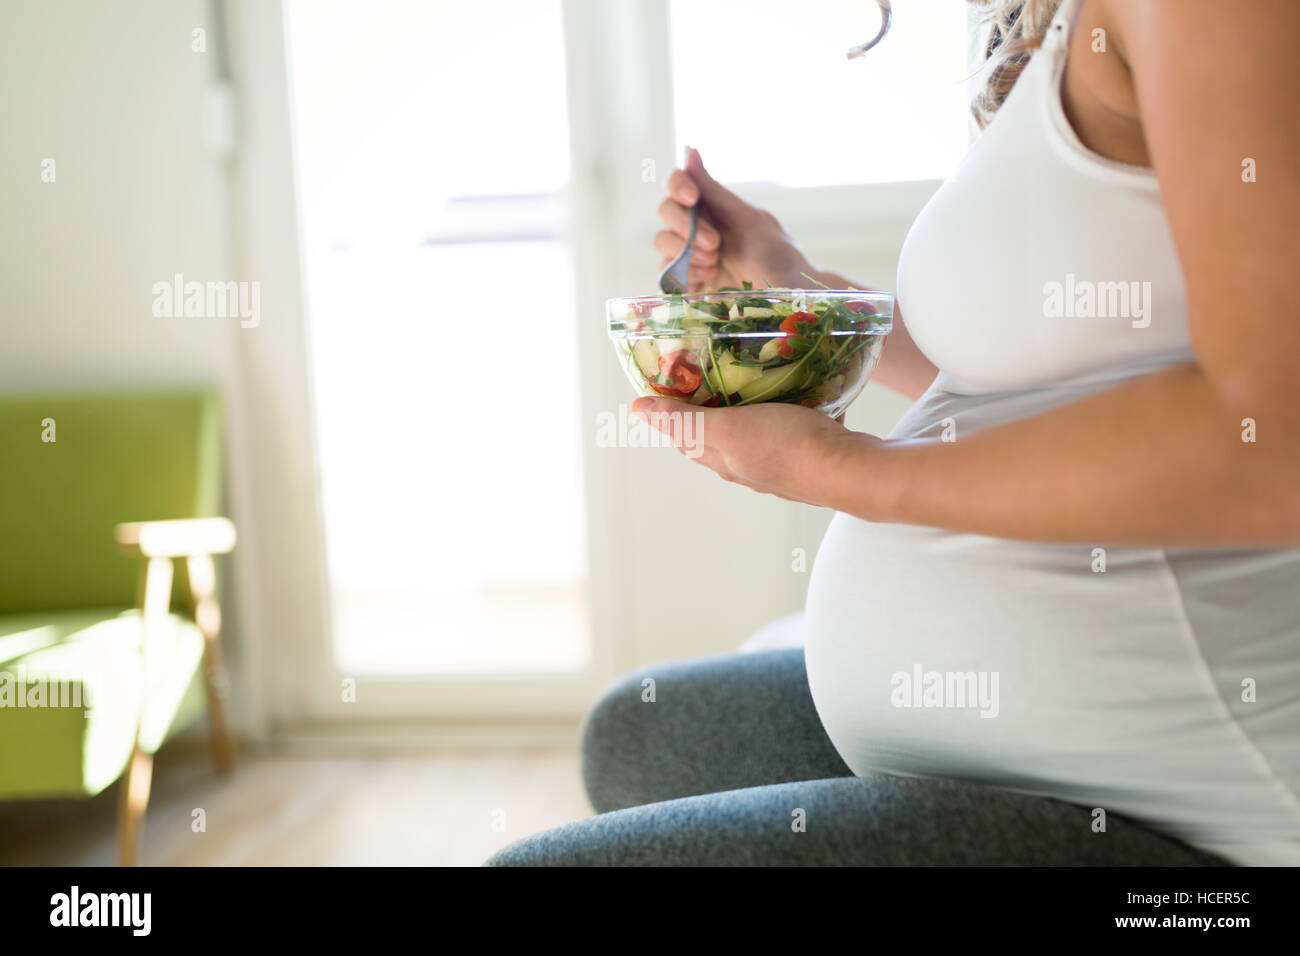 Pregnant woman on  healthy diet holding salad Stock Photo